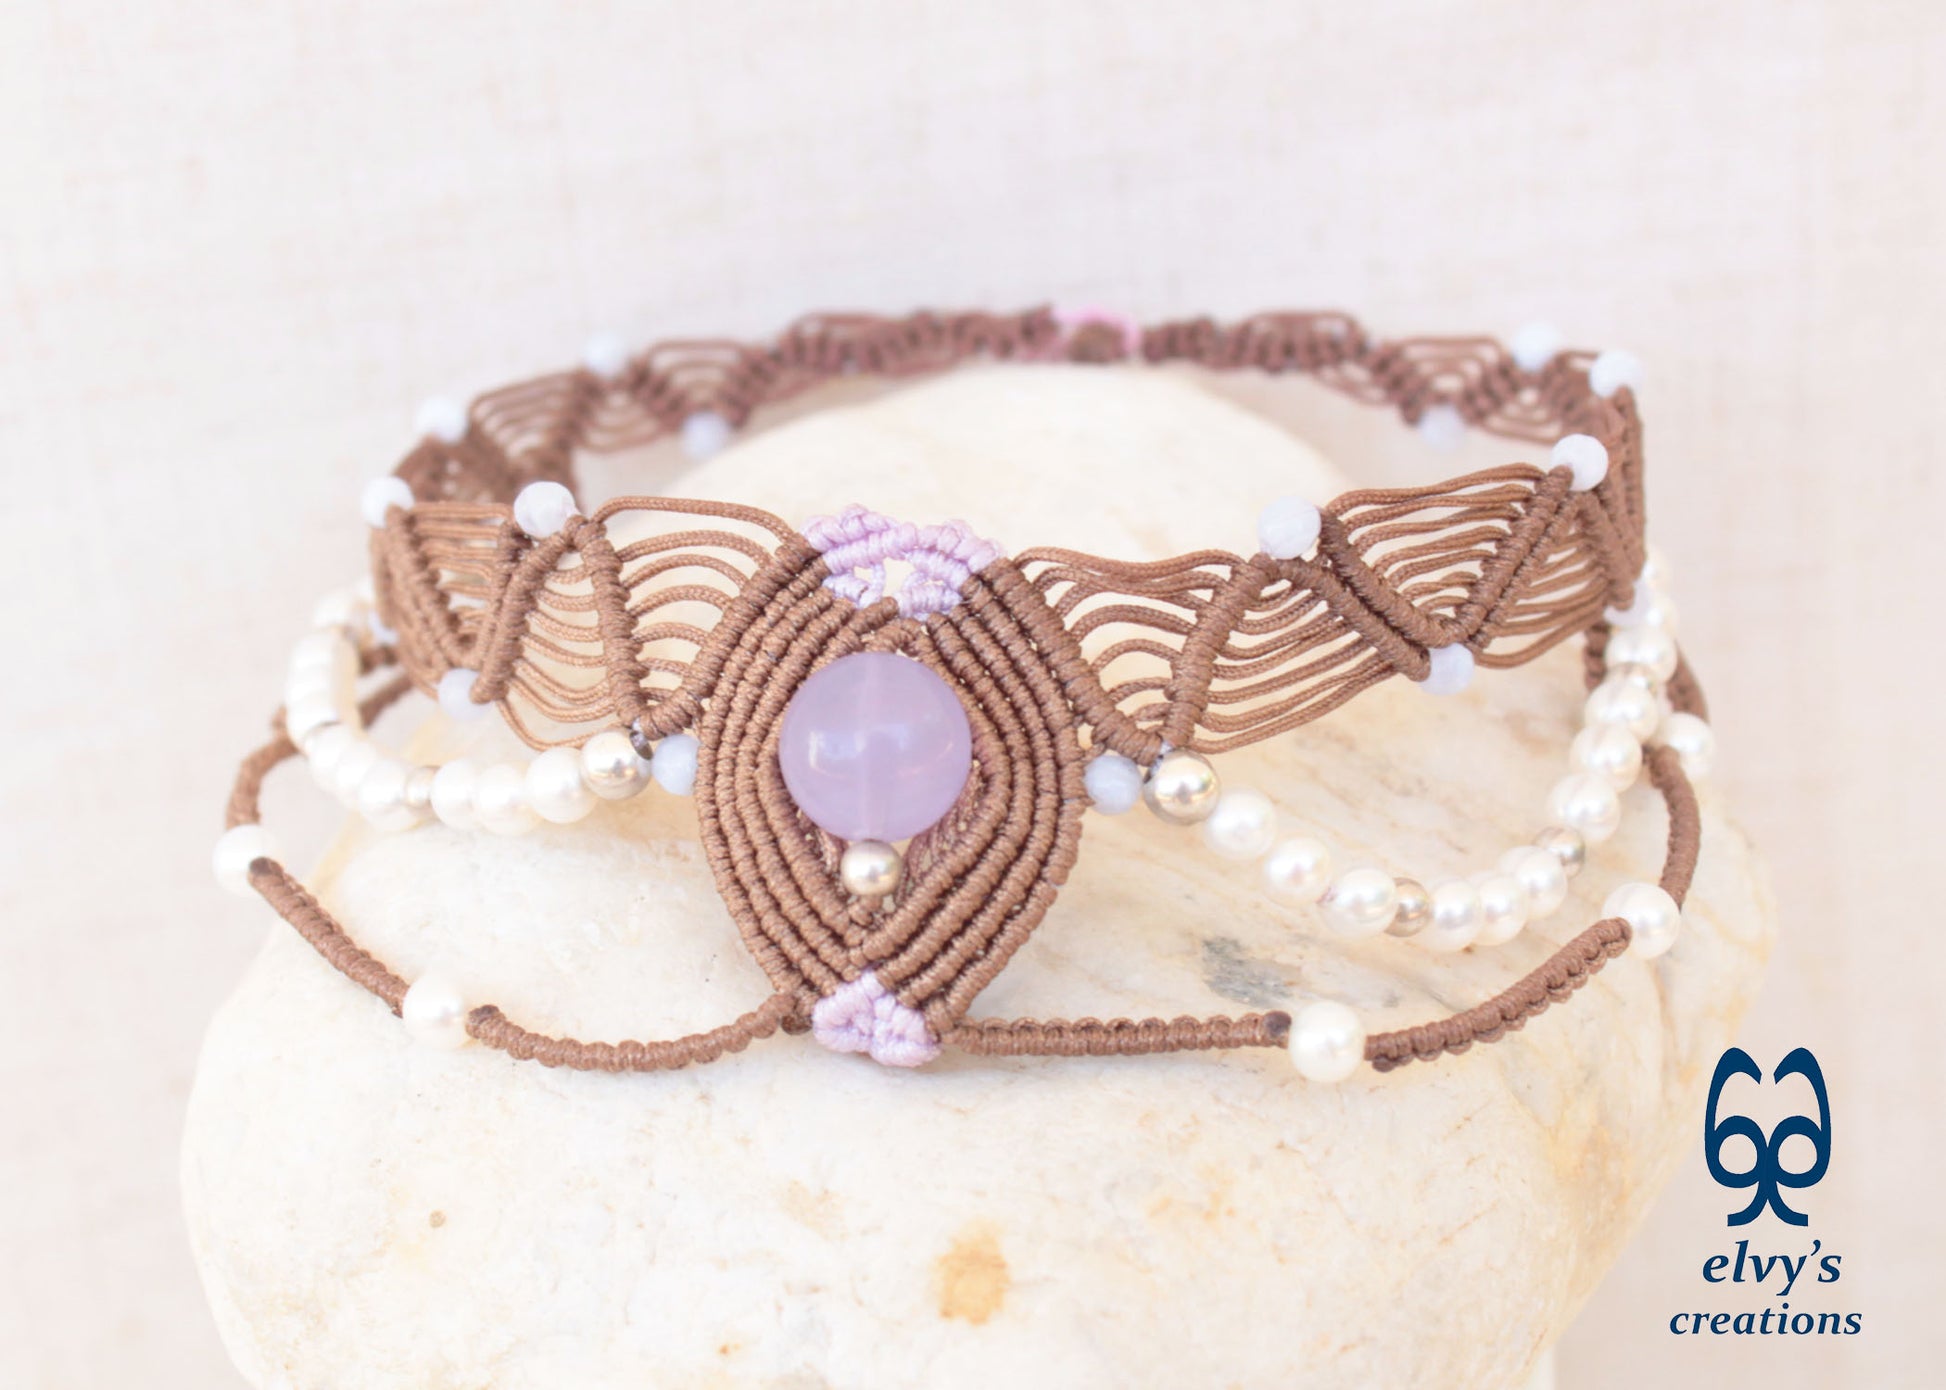 Handmade Brown Macrame Choker Necklace with Chalcedony and Pearls Adjustable Lace Necklace